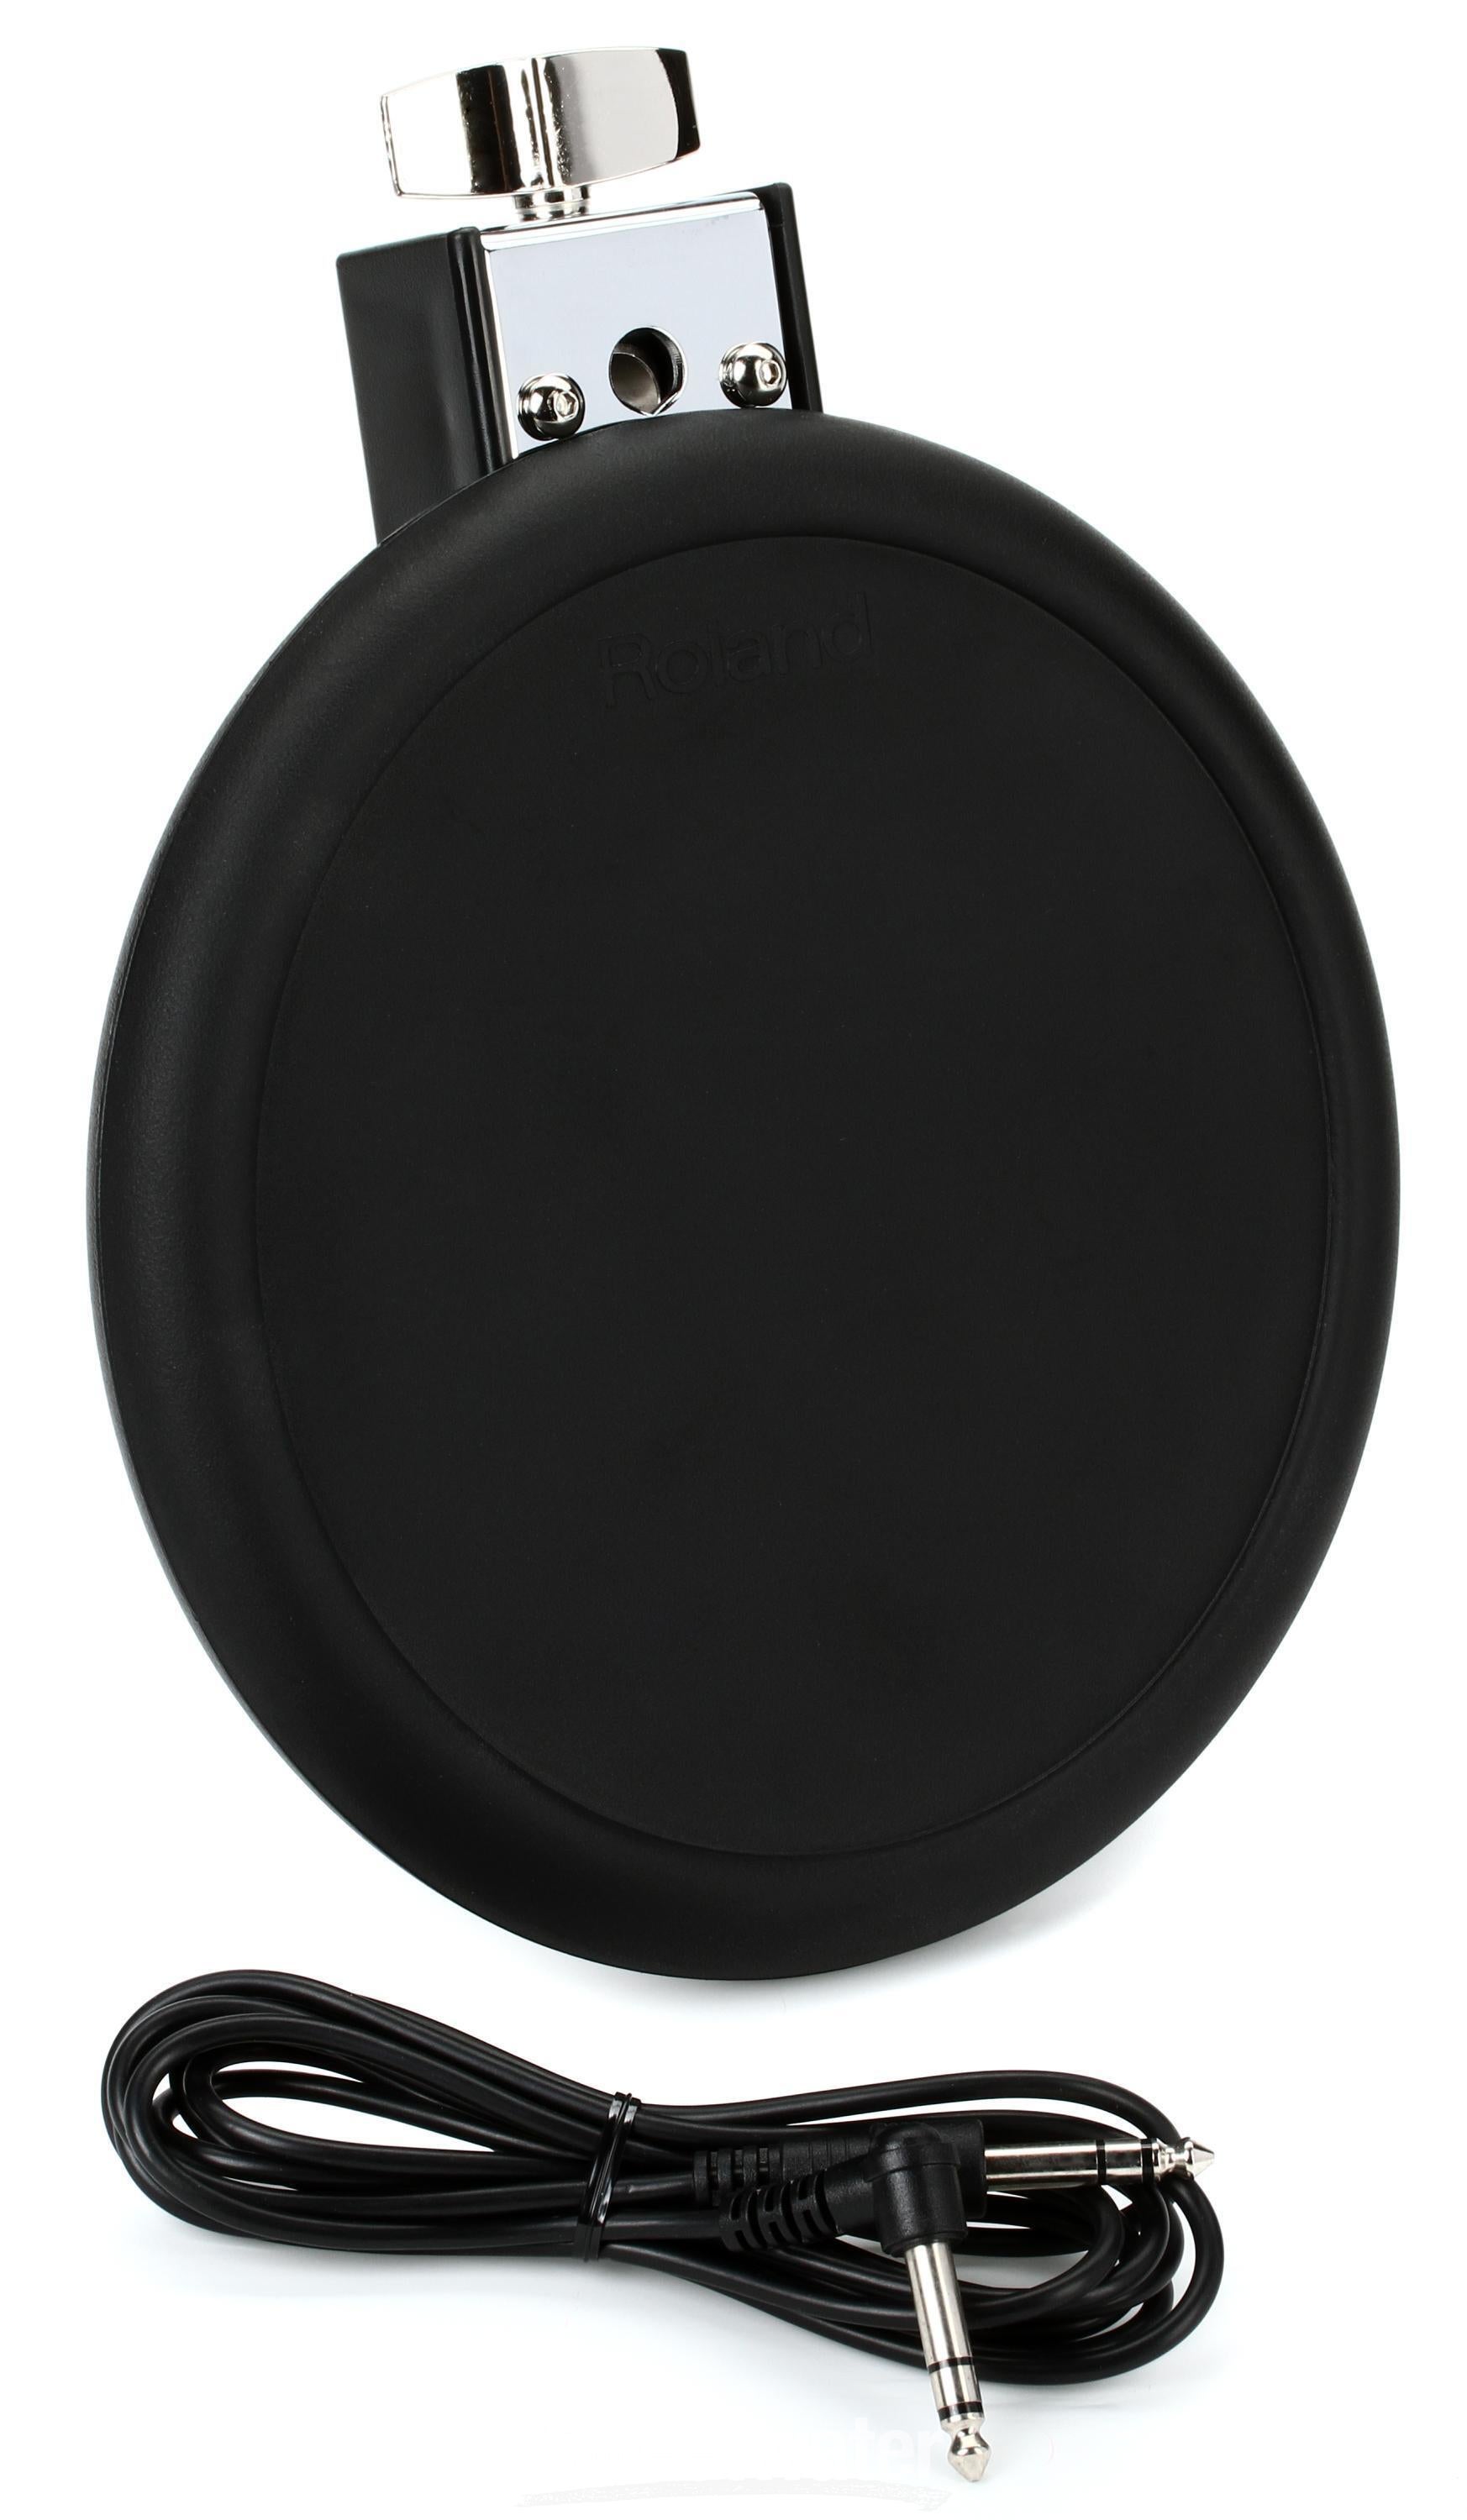 Roland V-Pad PD-8 8 inch Electronic Drum Pad | Sweetwater